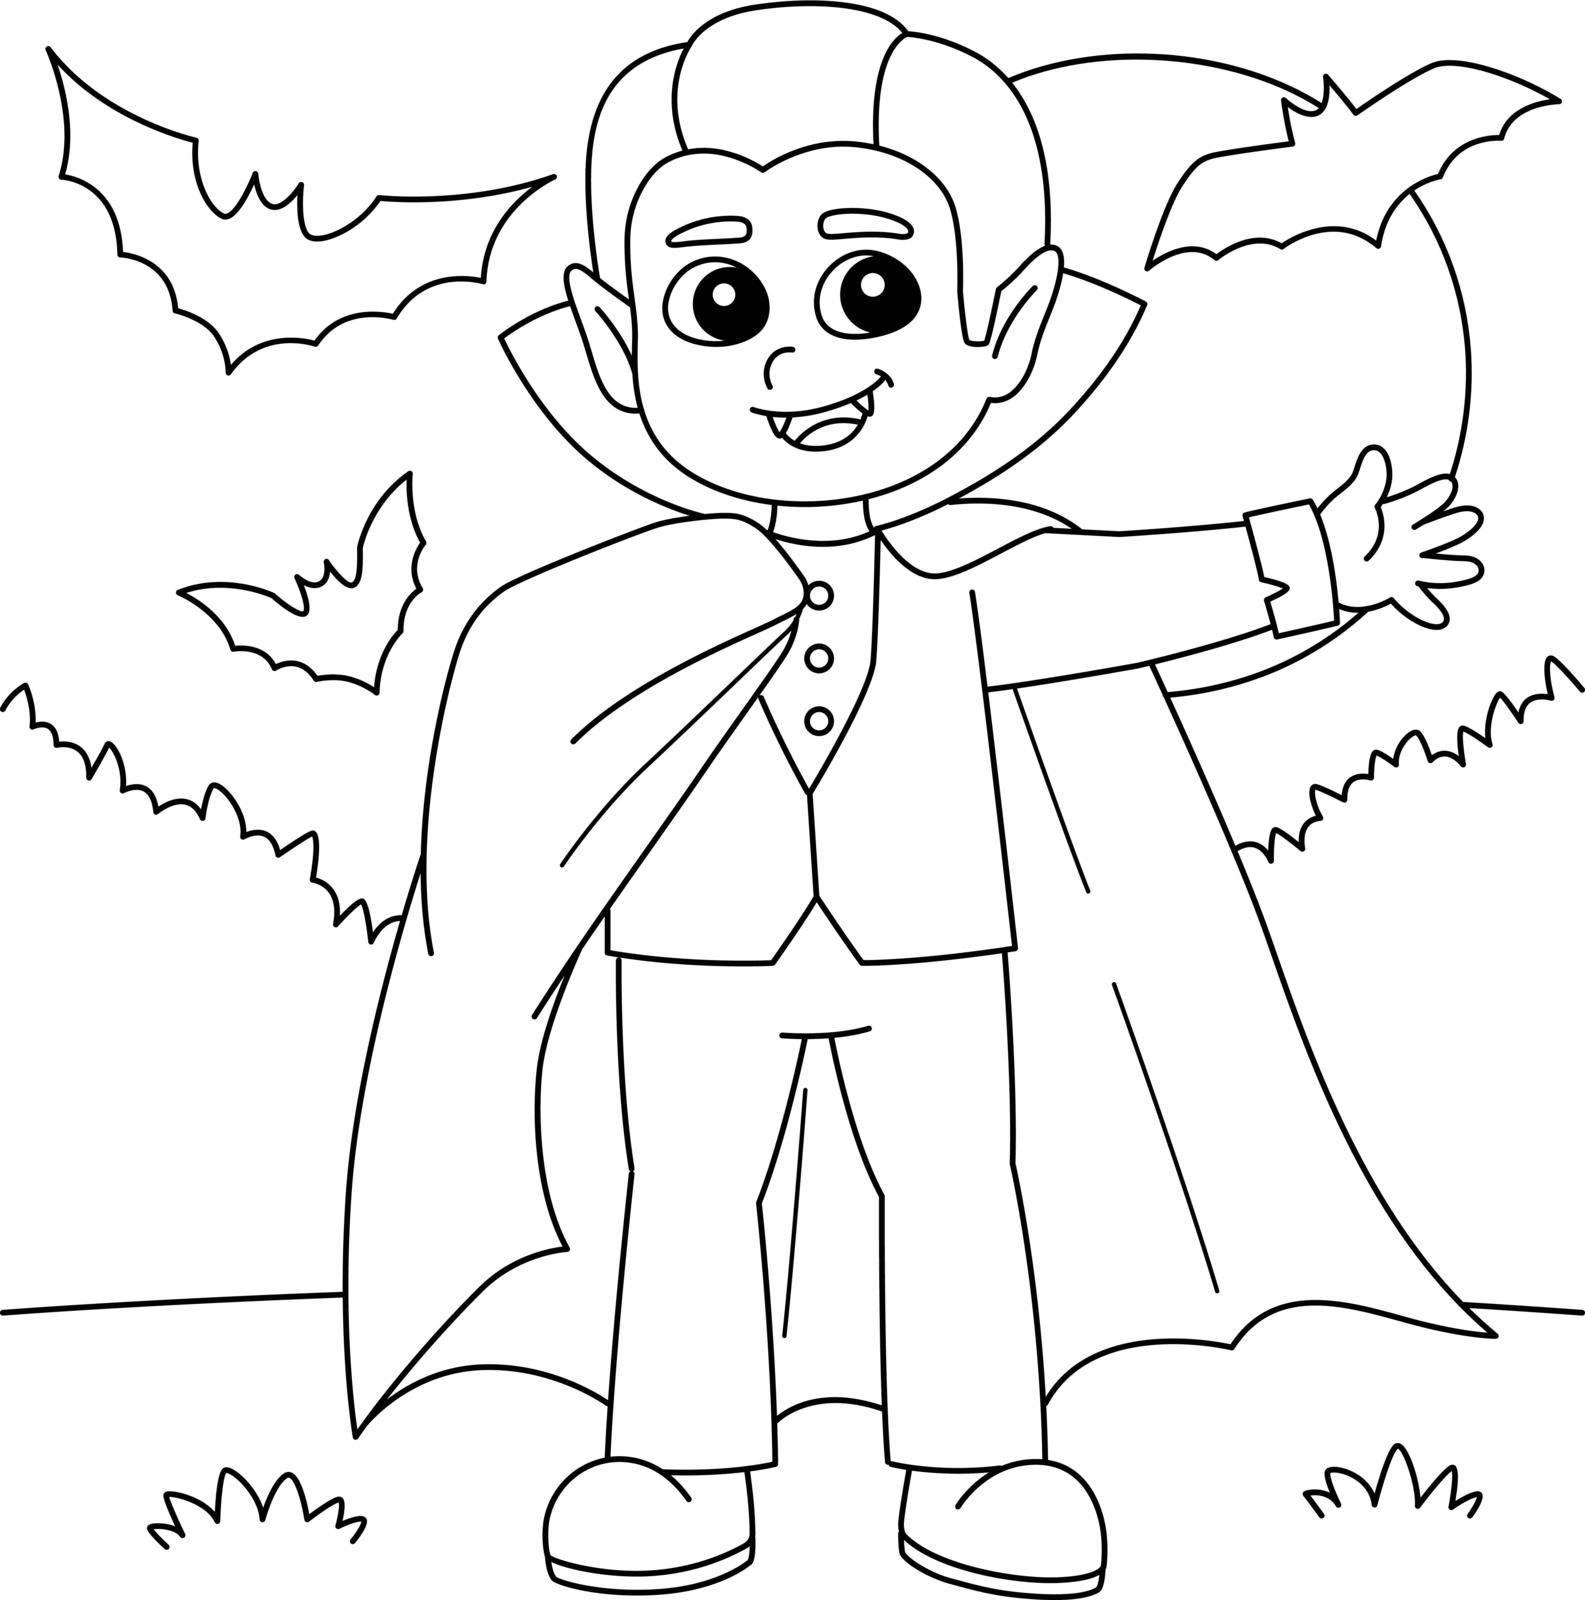 A cute and funny coloring page of a vampire halloween. Provides hours of coloring fun for children. To color, this page is very easy. Suitable for little kids and toddlers.